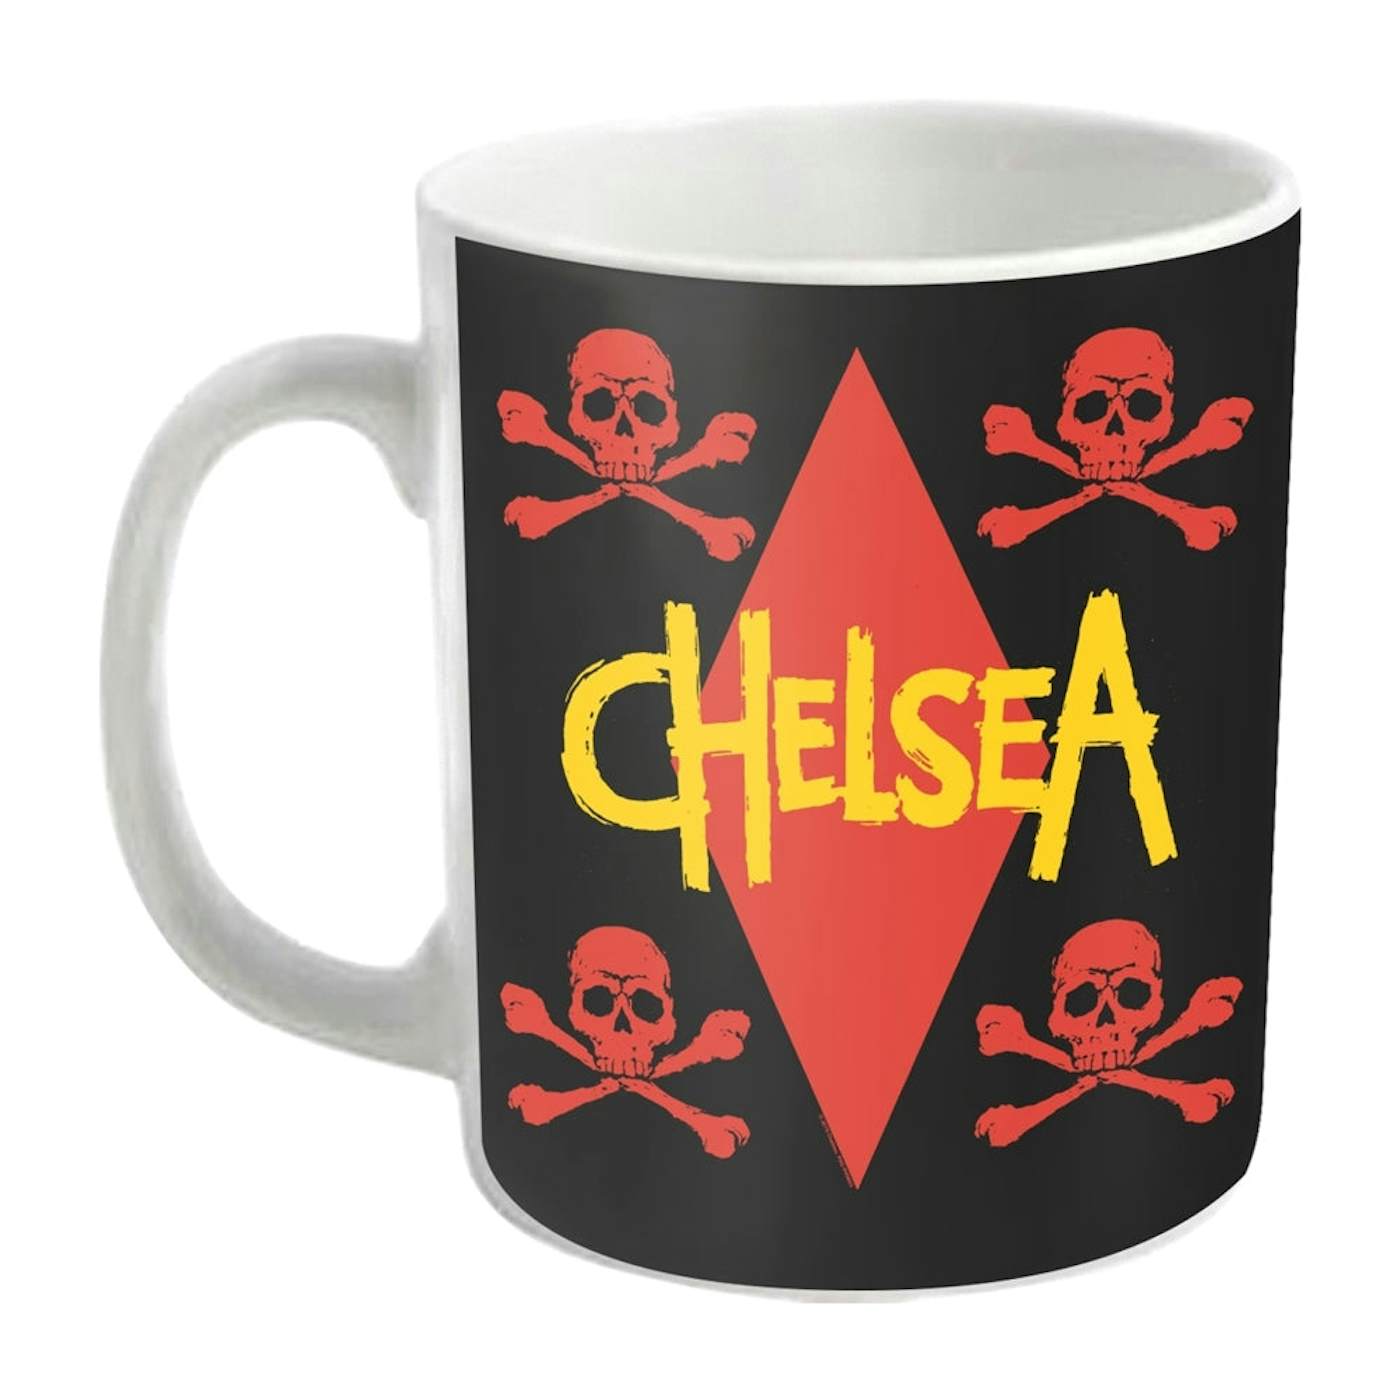 Chelsea Mug - Stand Out